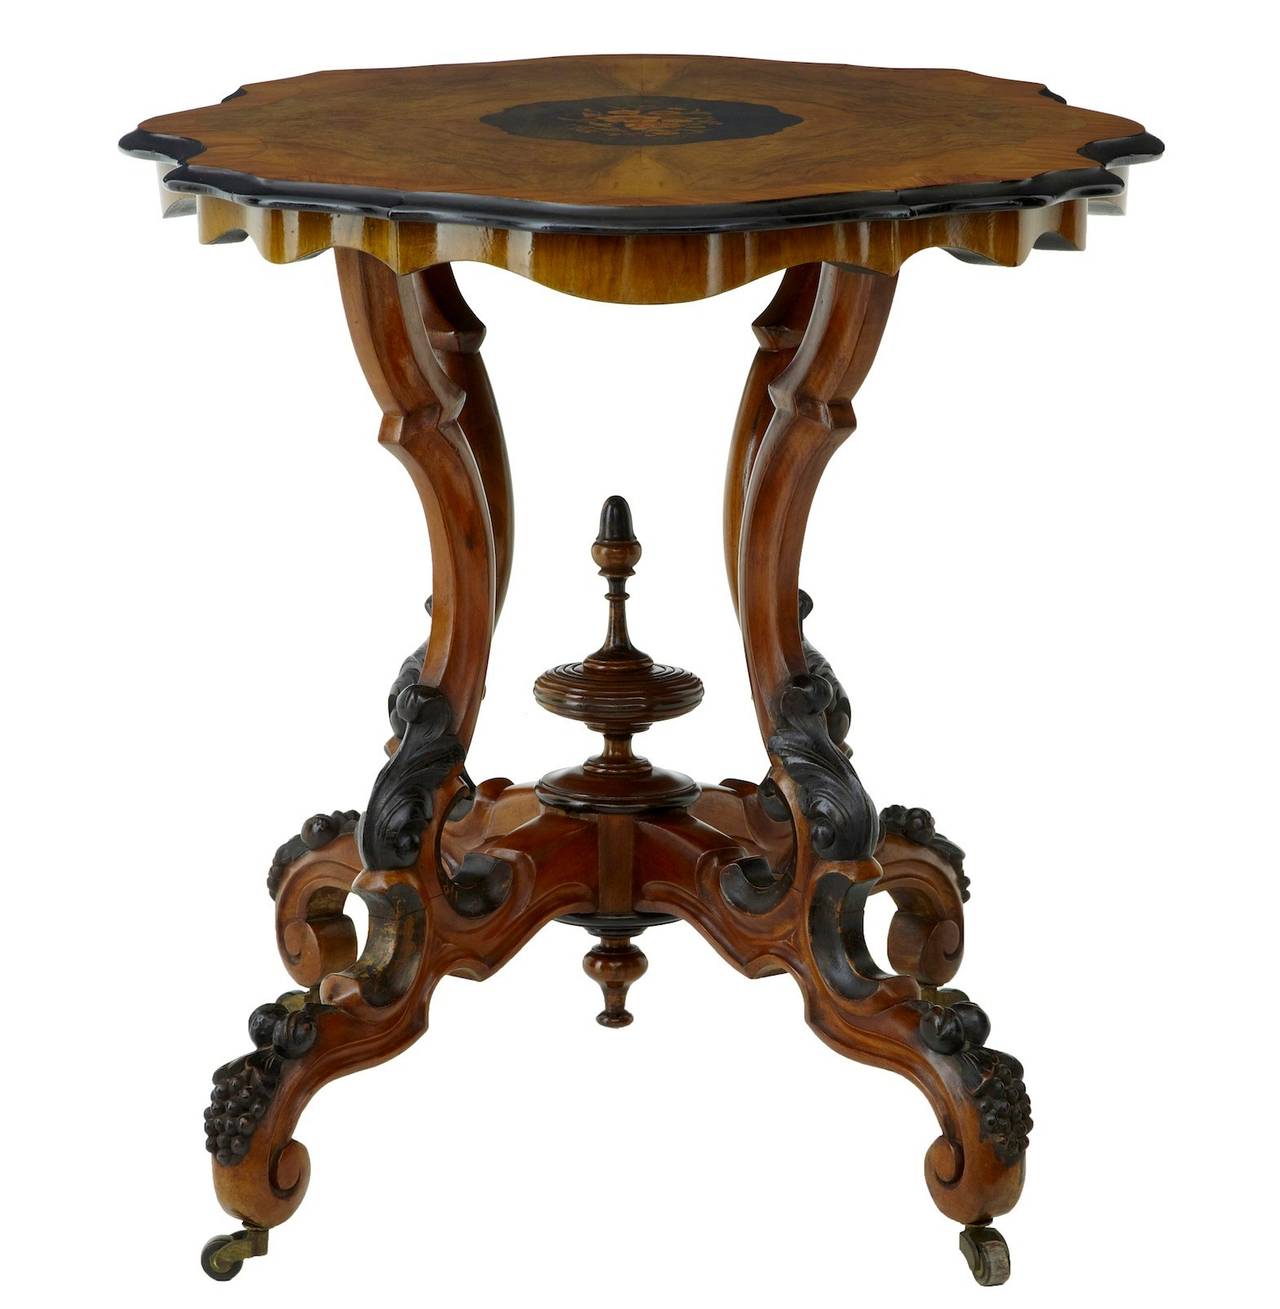 19th century high Victorian inlaid walnut center table
Fine quality walnut inlaid occasional table, circa 1870. 
Central inlaid floral section, using birch and walnuts veneers. Walnut top crossbanded in satinwood with ebonised shaped edging.